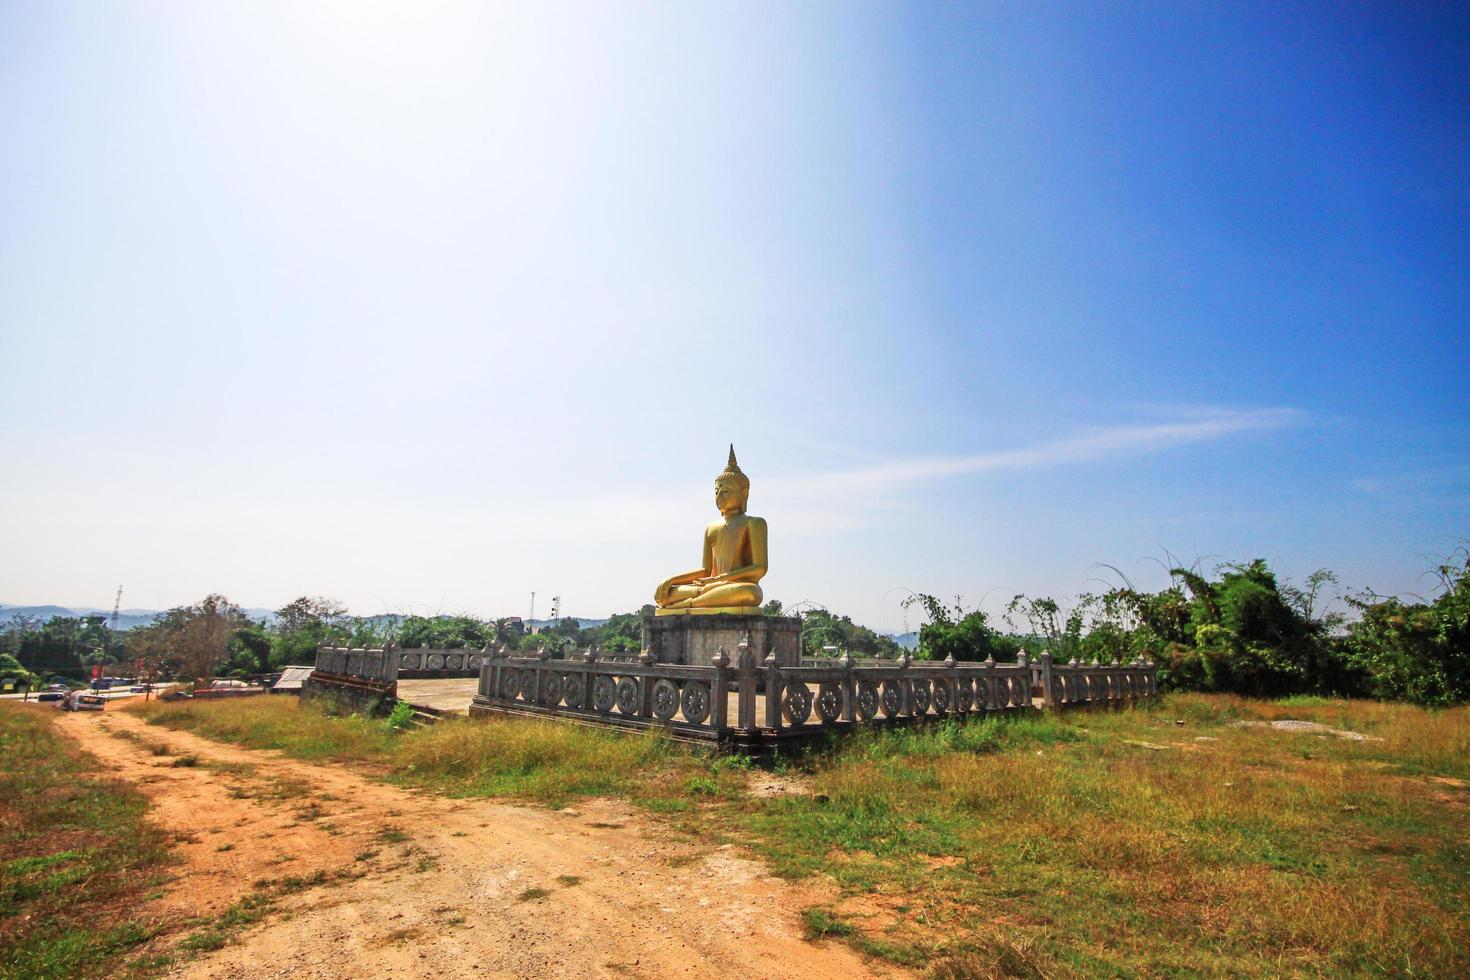 Golden Buddha statue and the old pagoda at ancient temple, Thailand photo